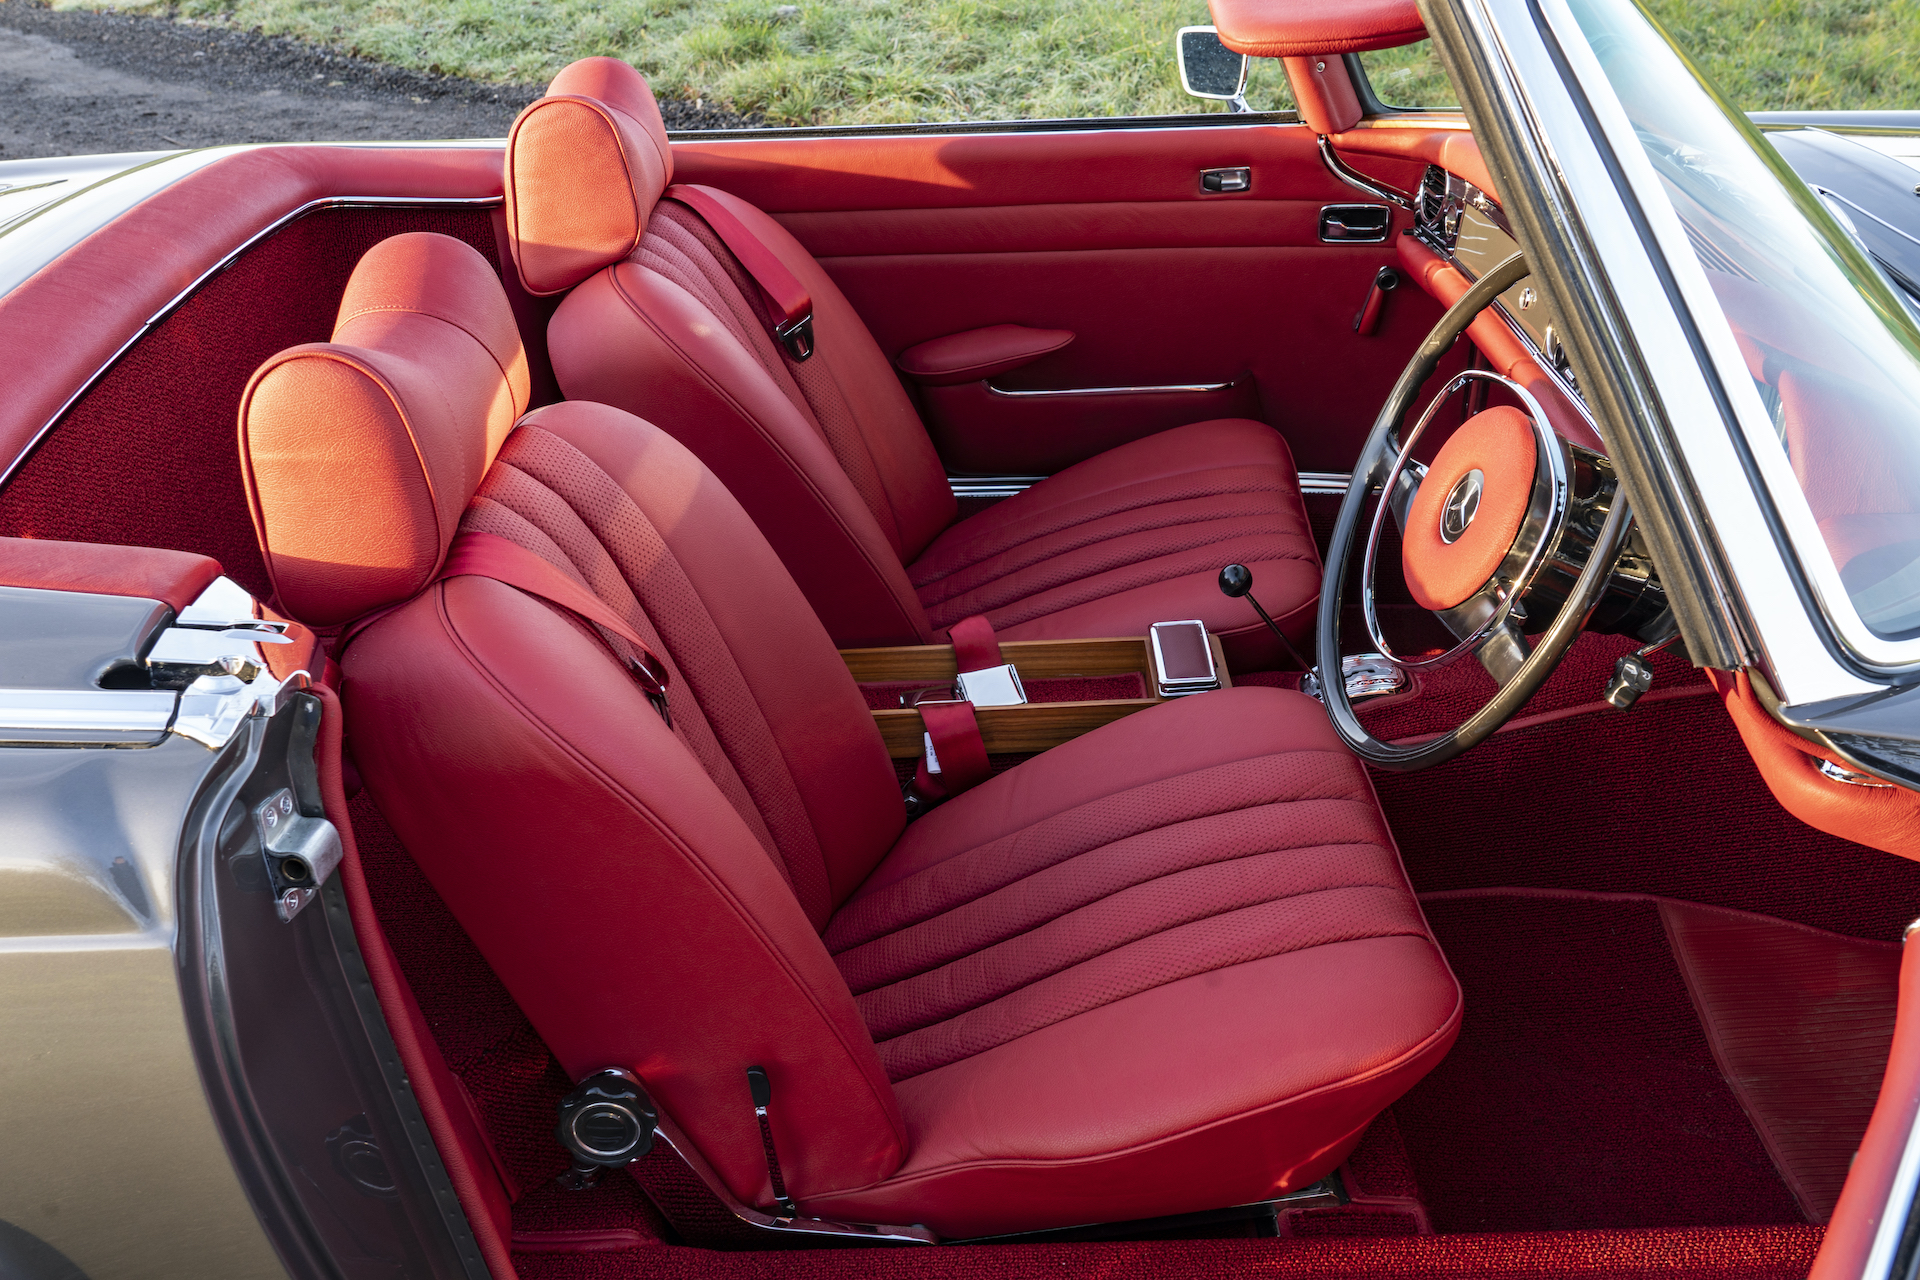 Sumptuous Red Leather Interior of a Mercedes Pagoda 280SL